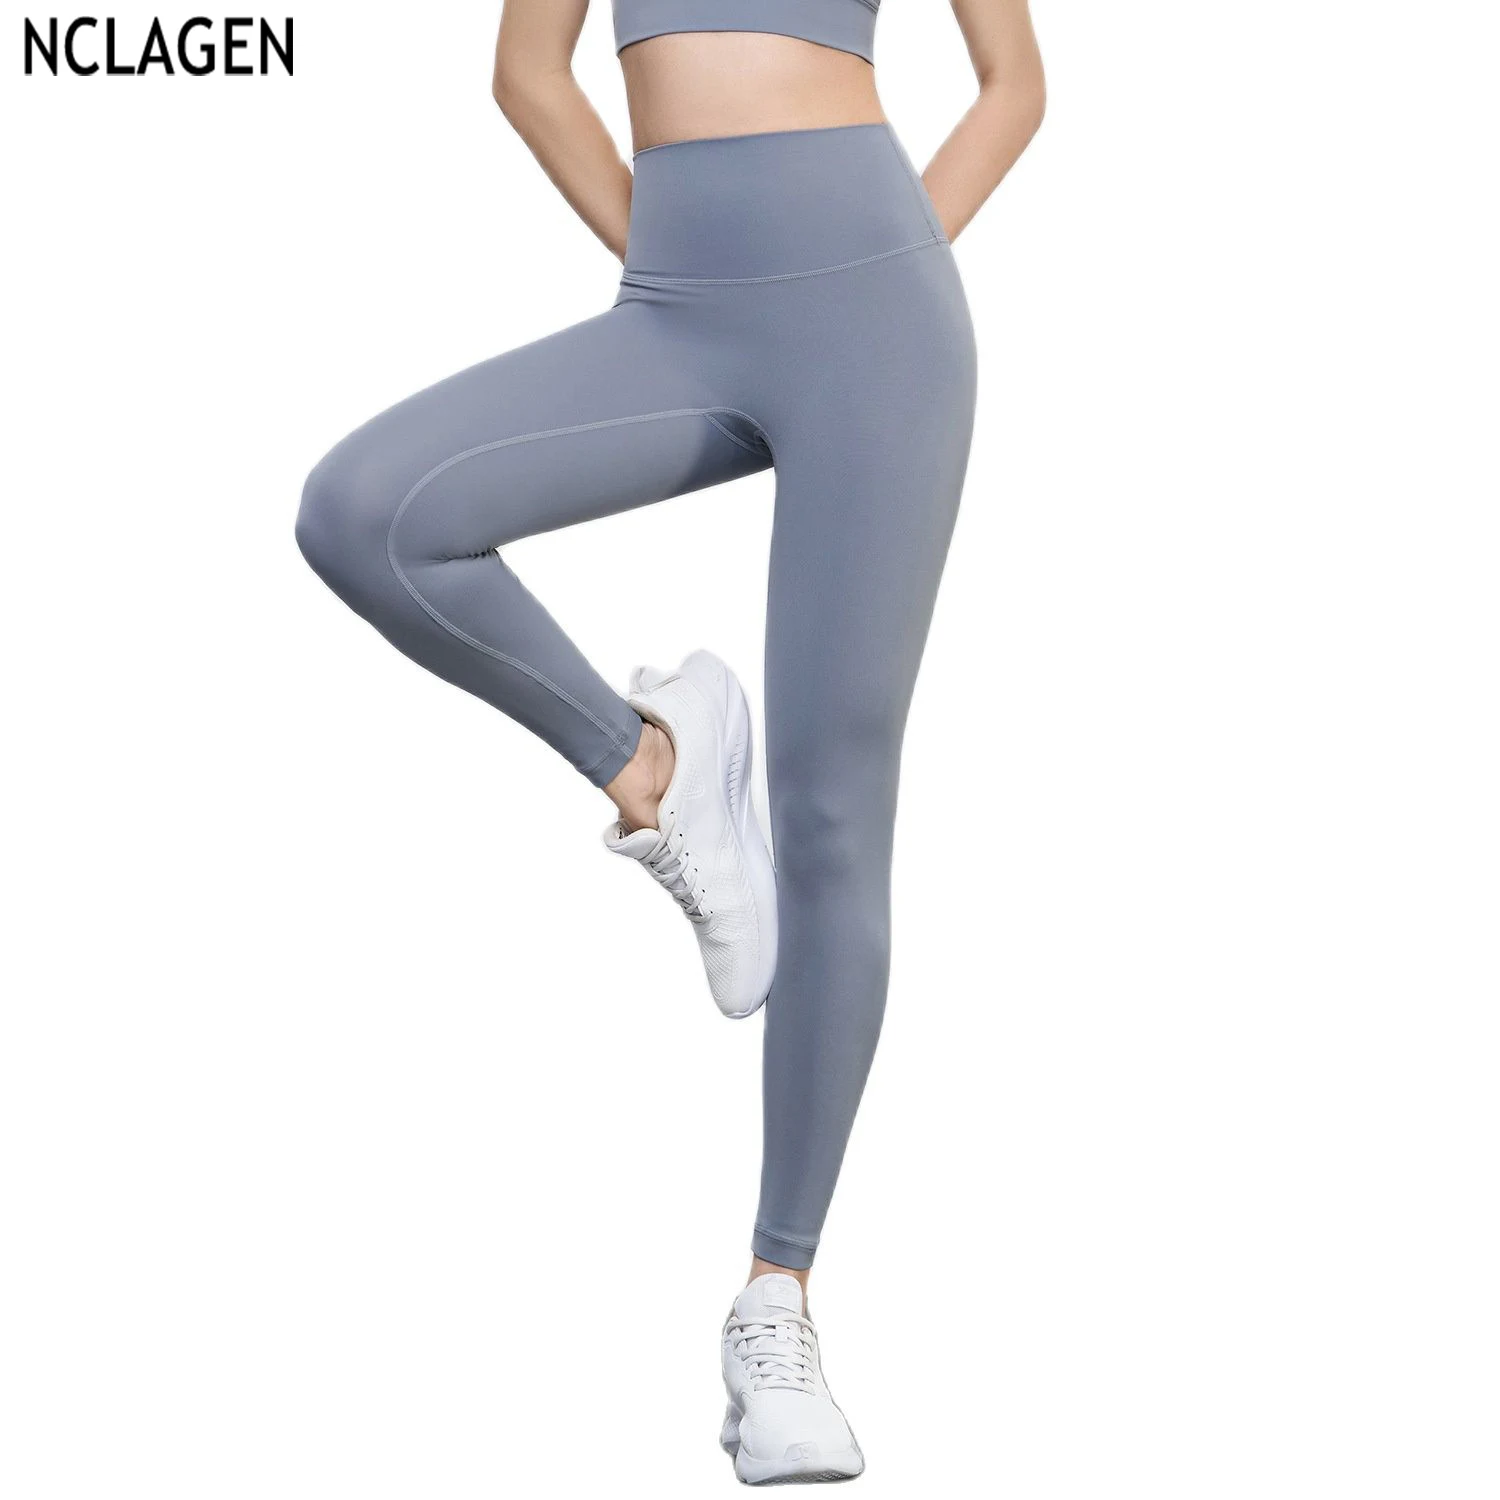 

NCLAGEN Pocket Naked Feel Yoga Pants High Waist Sports Leggings Women Squat Proof NO Front Seam bottoms Fitness GYM Tights